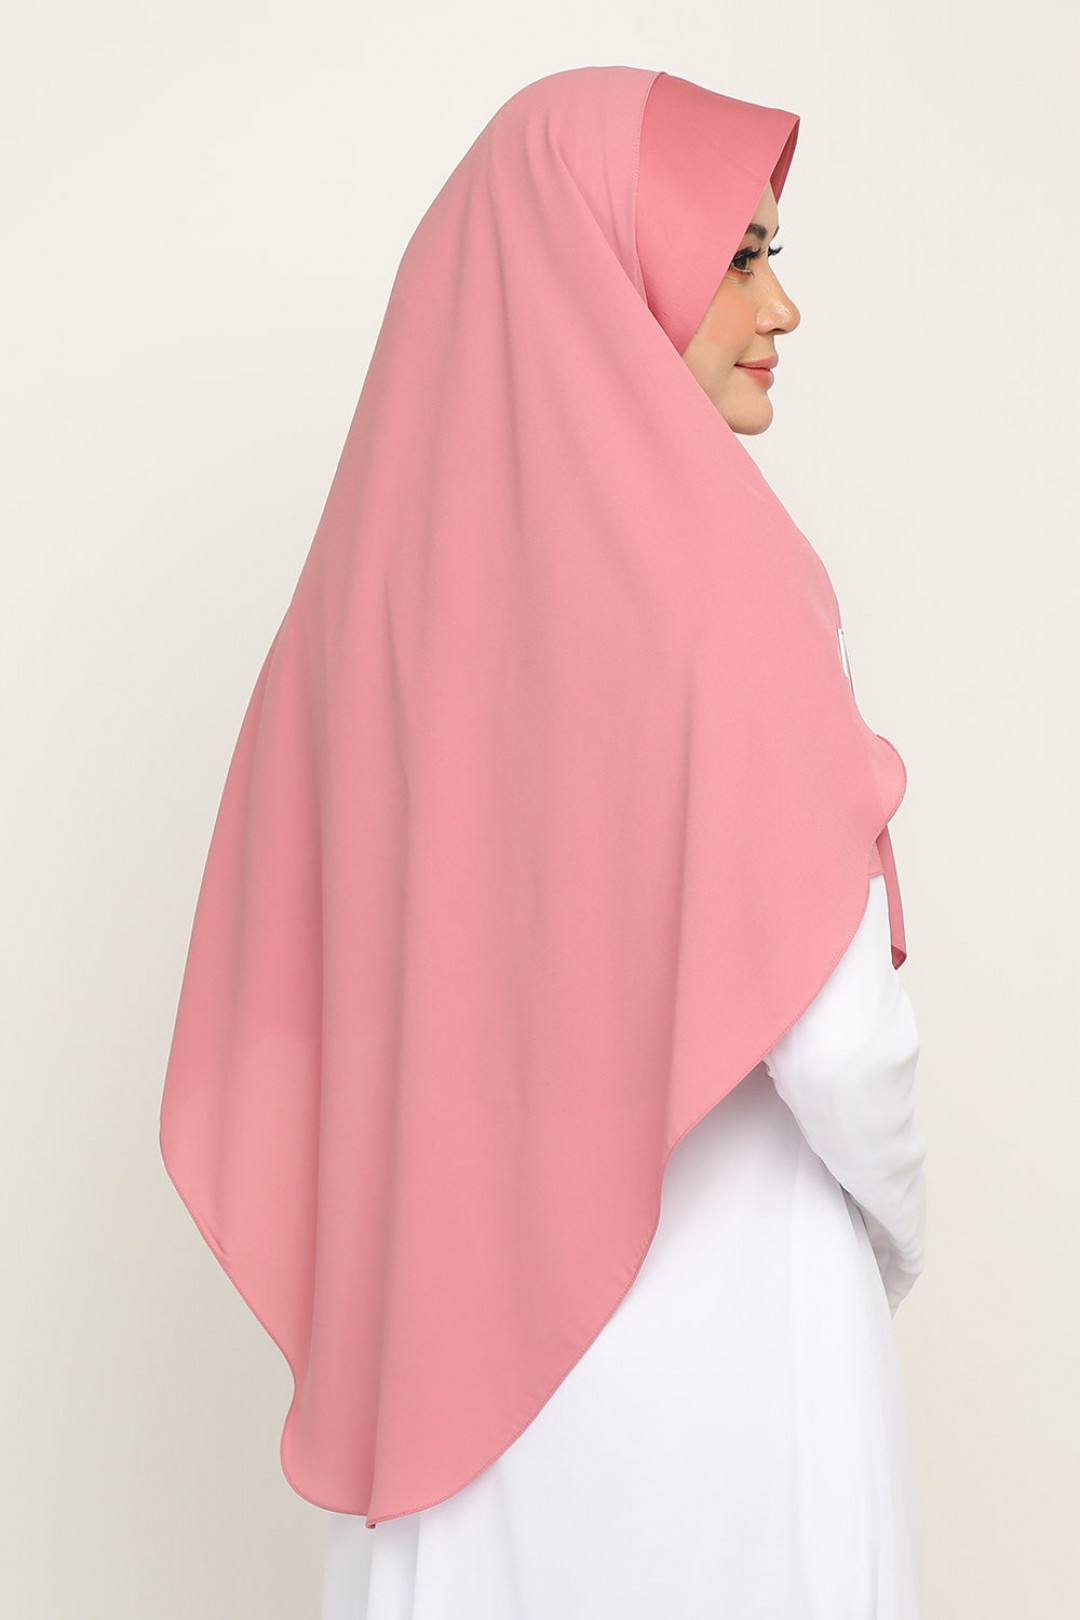 Instant Plain Awning Gummy Pink